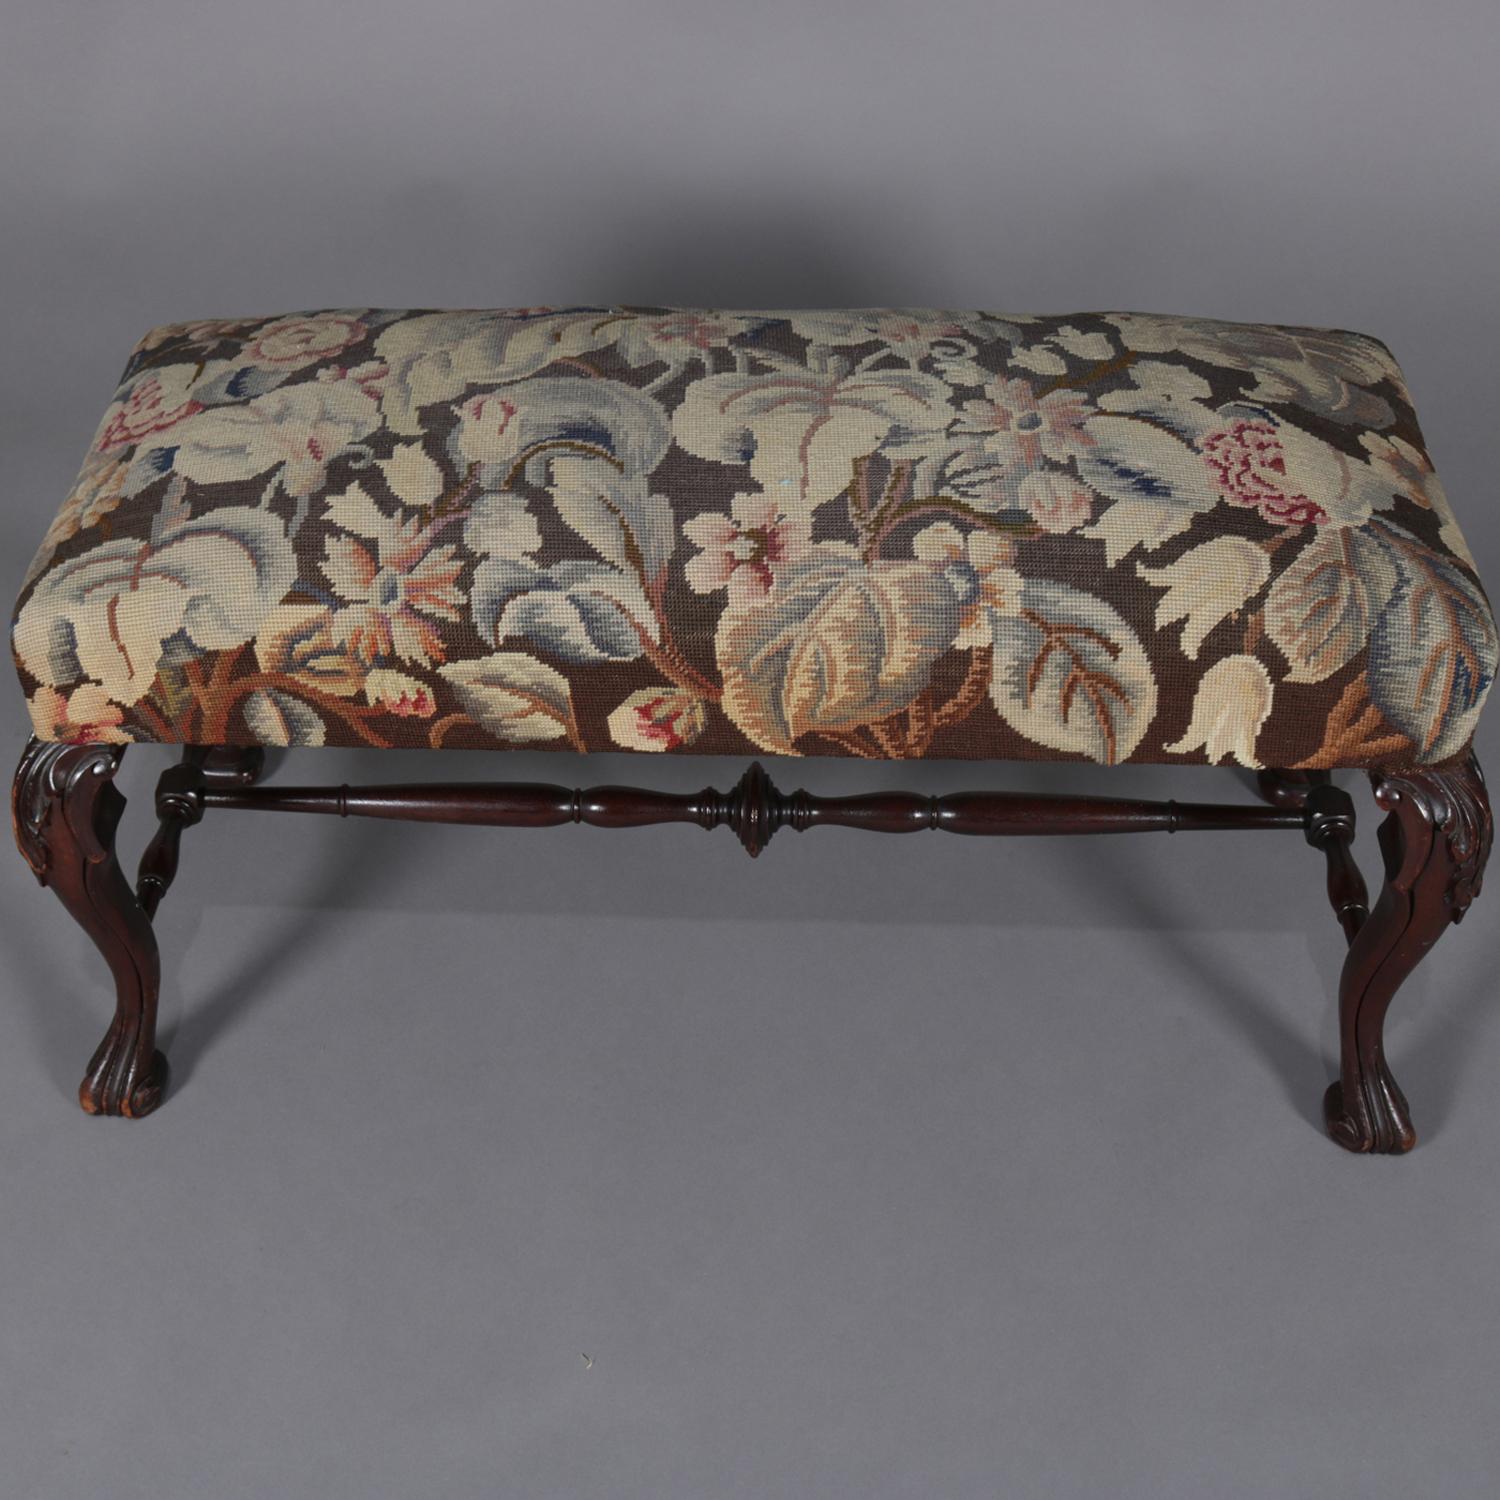 Antique French bench features carved mahogany frame with cabriole legs having acanthus knees and turned stretcher, upholstery is tapestry in foliate design, circa 1890.

Measures: 19